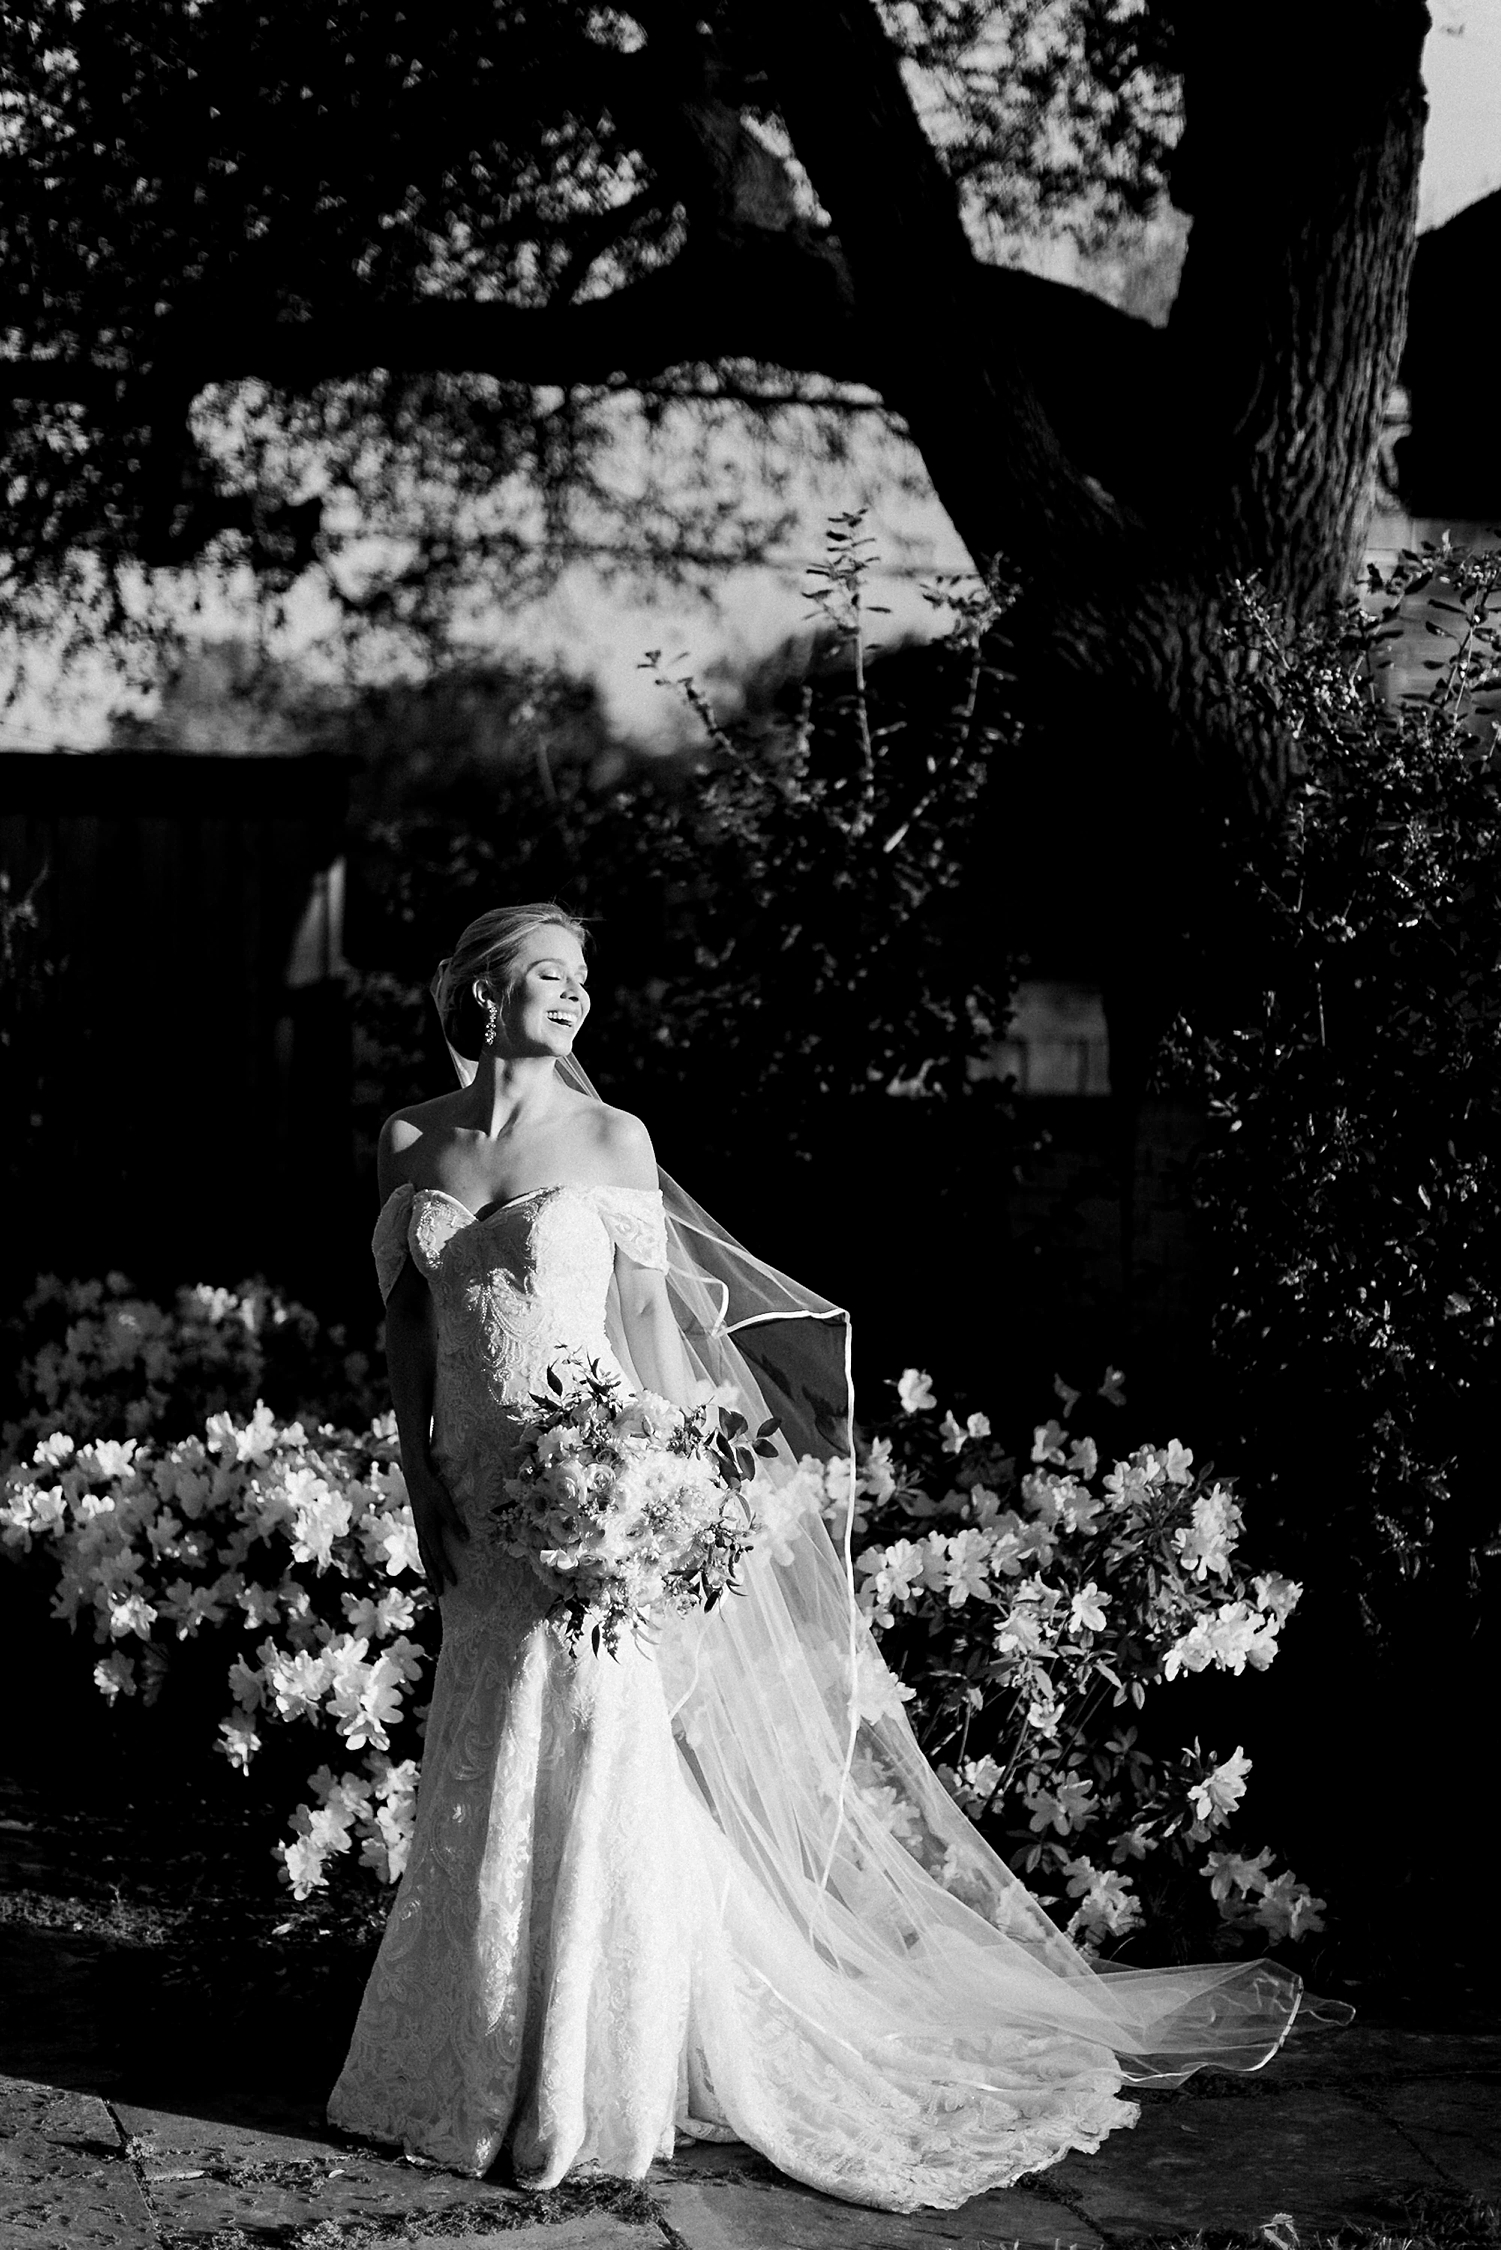 bridal session in garden bride in wedding dress and veil holding white bouquet